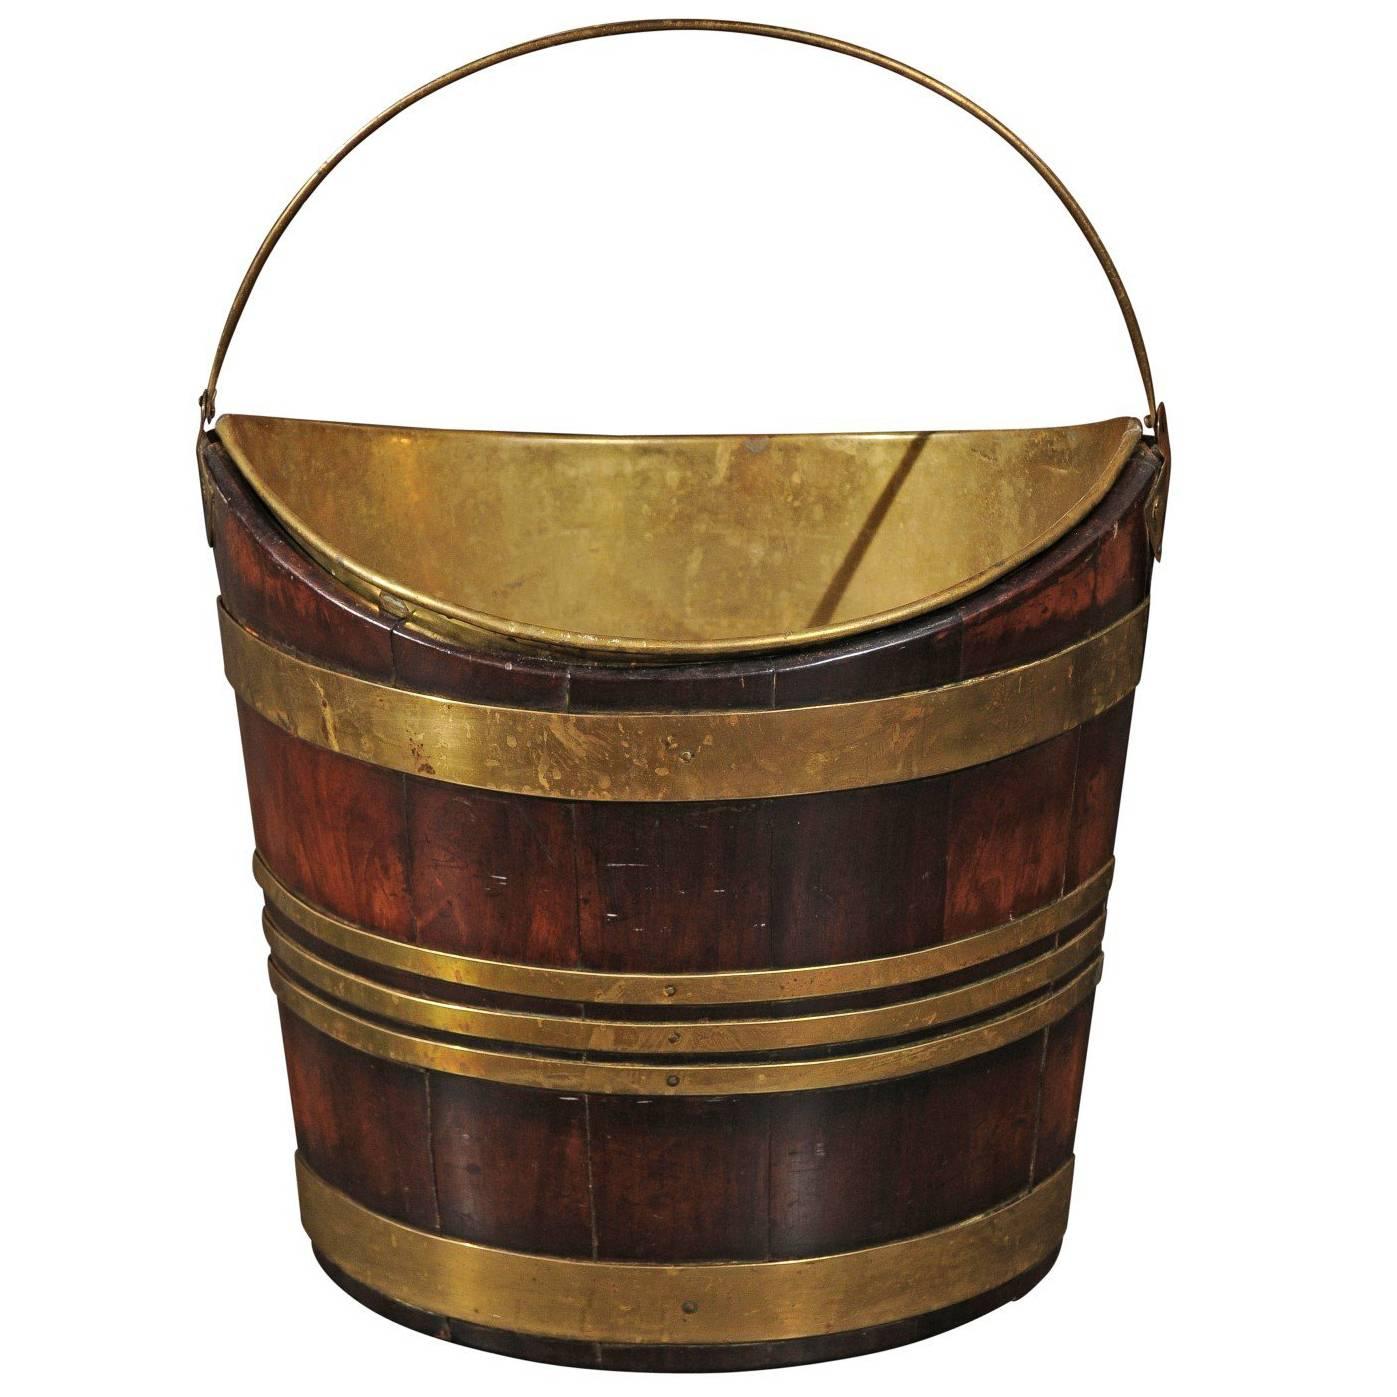 English Mahogany and Brass Peat Bucket with Handle from Mid-19th Century